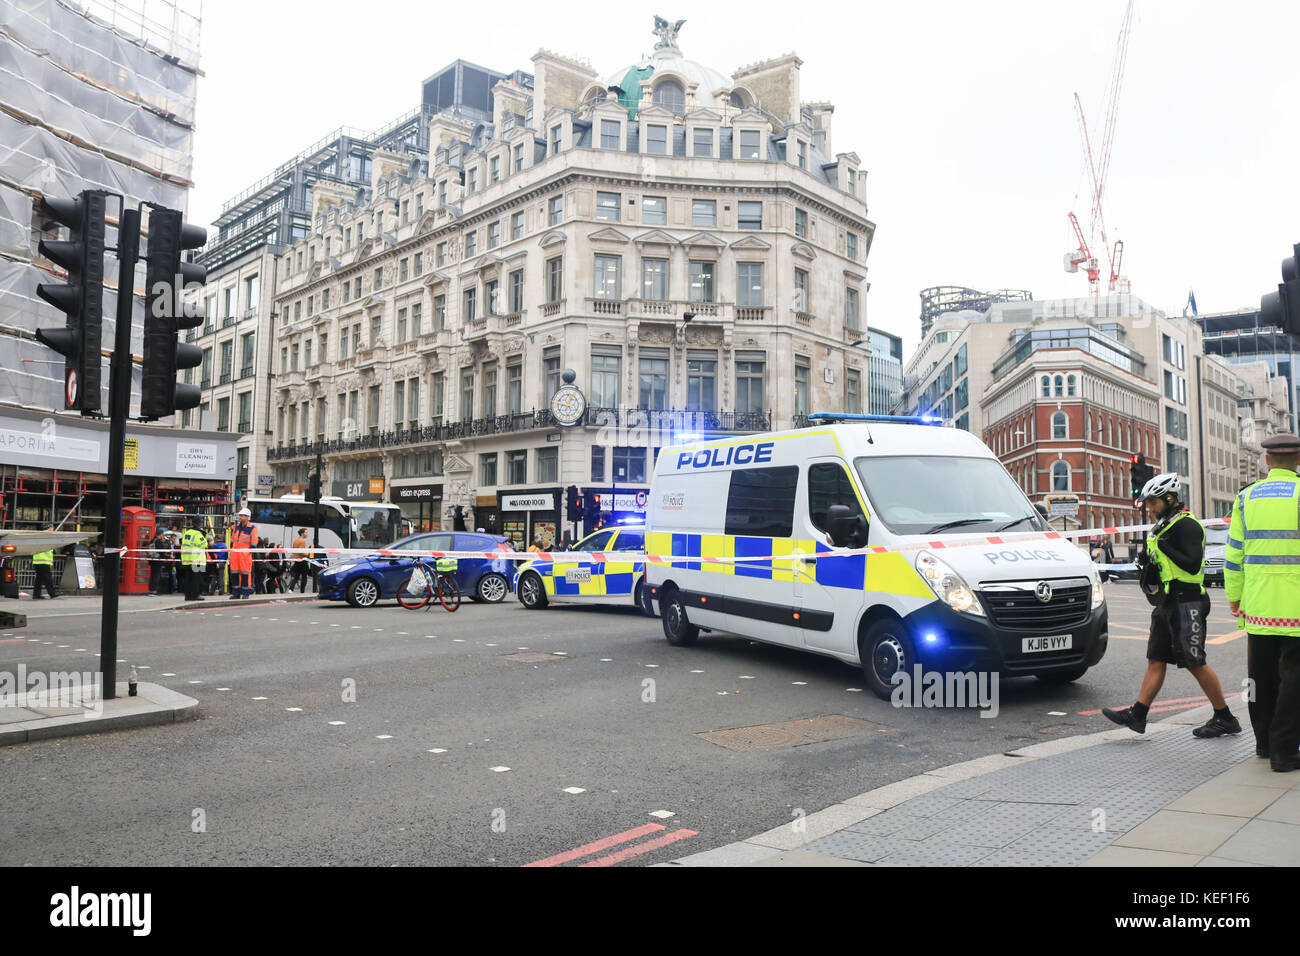 London, UK. 20th Oct, 2017. City of London Police have cordoned the area around  Ludgate Circus,   after a pedestrian was  hit and killed by a van near the junction of Fleet Street and New Bridge Street. The area which has  been notorious for previous deaths because of its large junctions and lack of pedestrian crossings. Credit: amer ghazzal/Alamy Live News Stock Photo